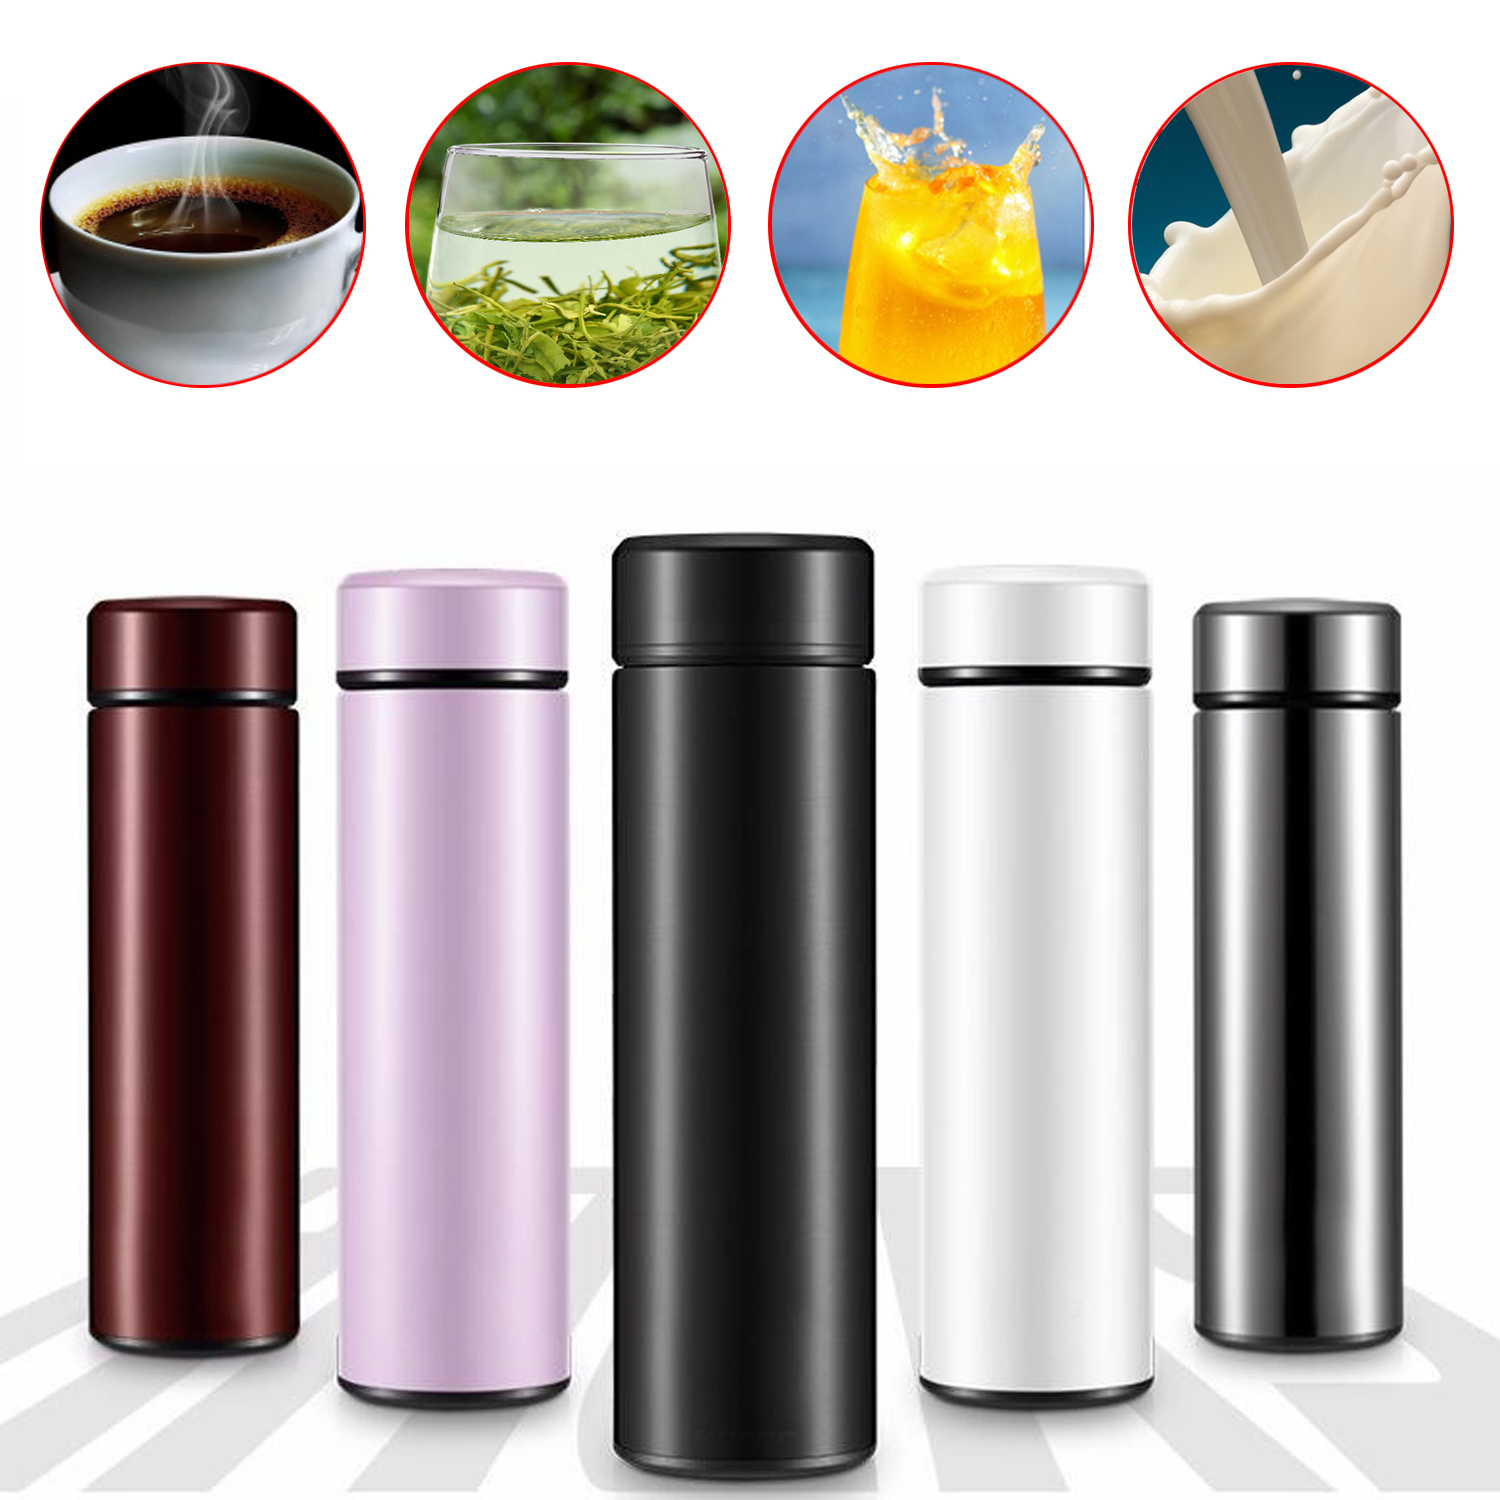  500ml Smart Water Bottle with LED Temperature Display 304 Stainless Steel for Hot And Cold Drinks